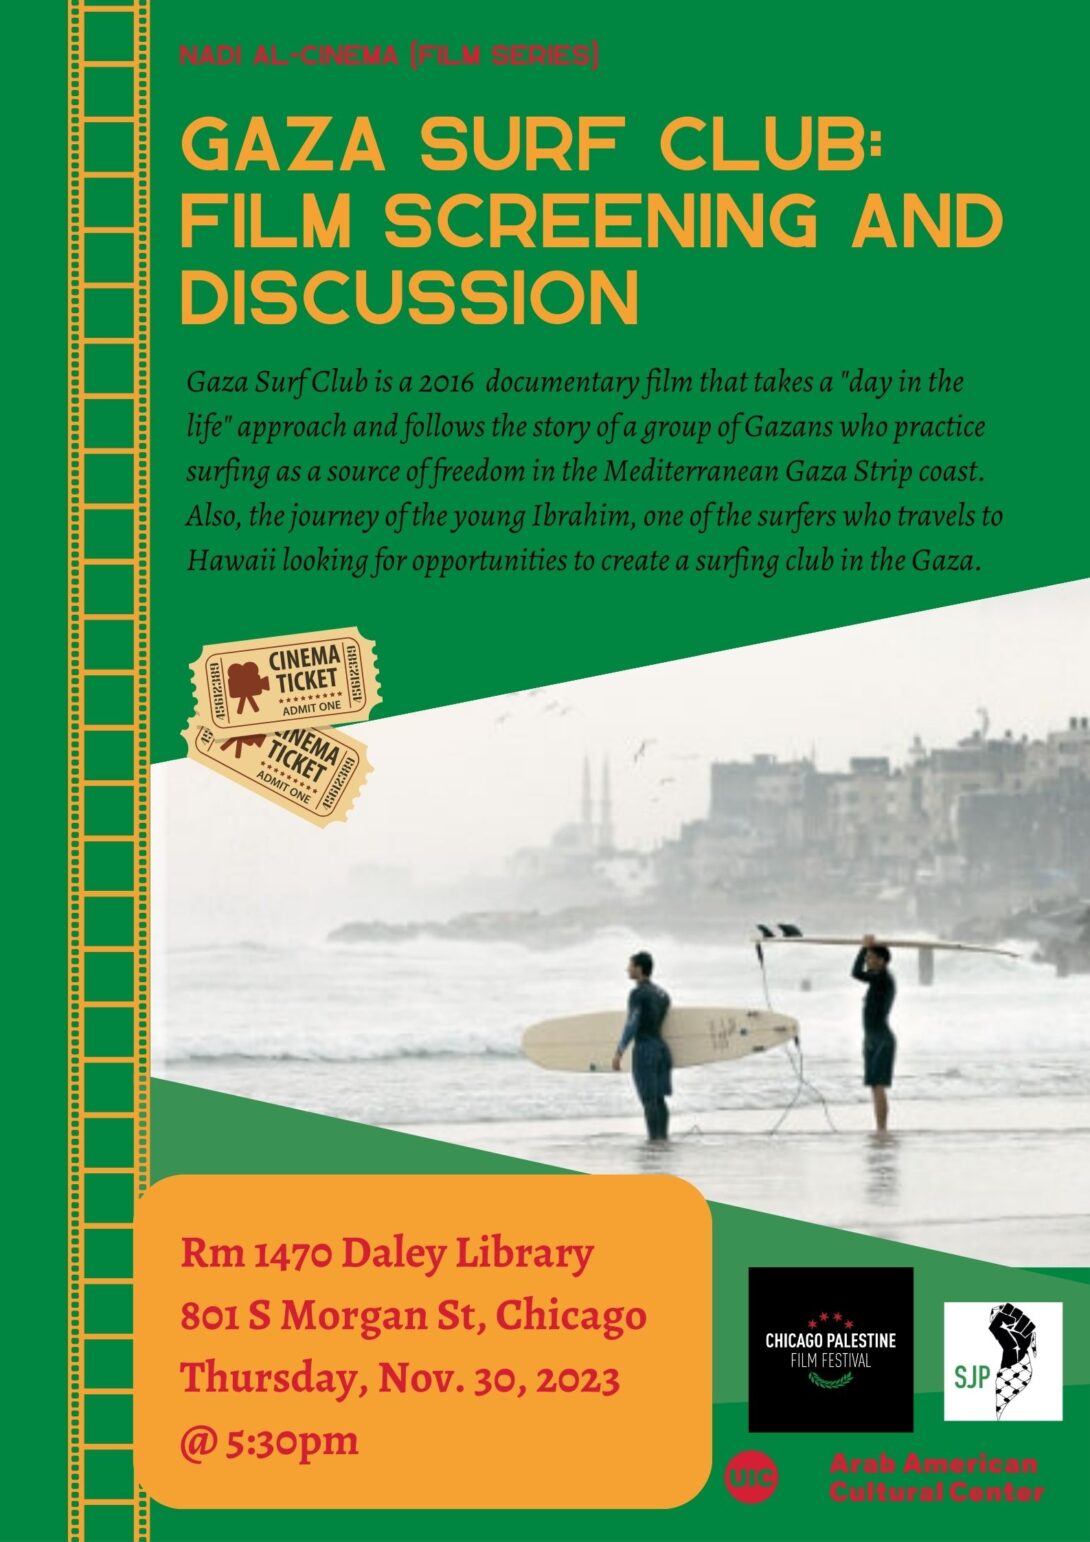 Green flier with text in red, yellow and black. Logos are in the bottom right corner. A long film strip in yellow is on the left hand side. A photograph of two people with surf hear at the a beach is in the middle with drawings of two movie tickets in beige and red.